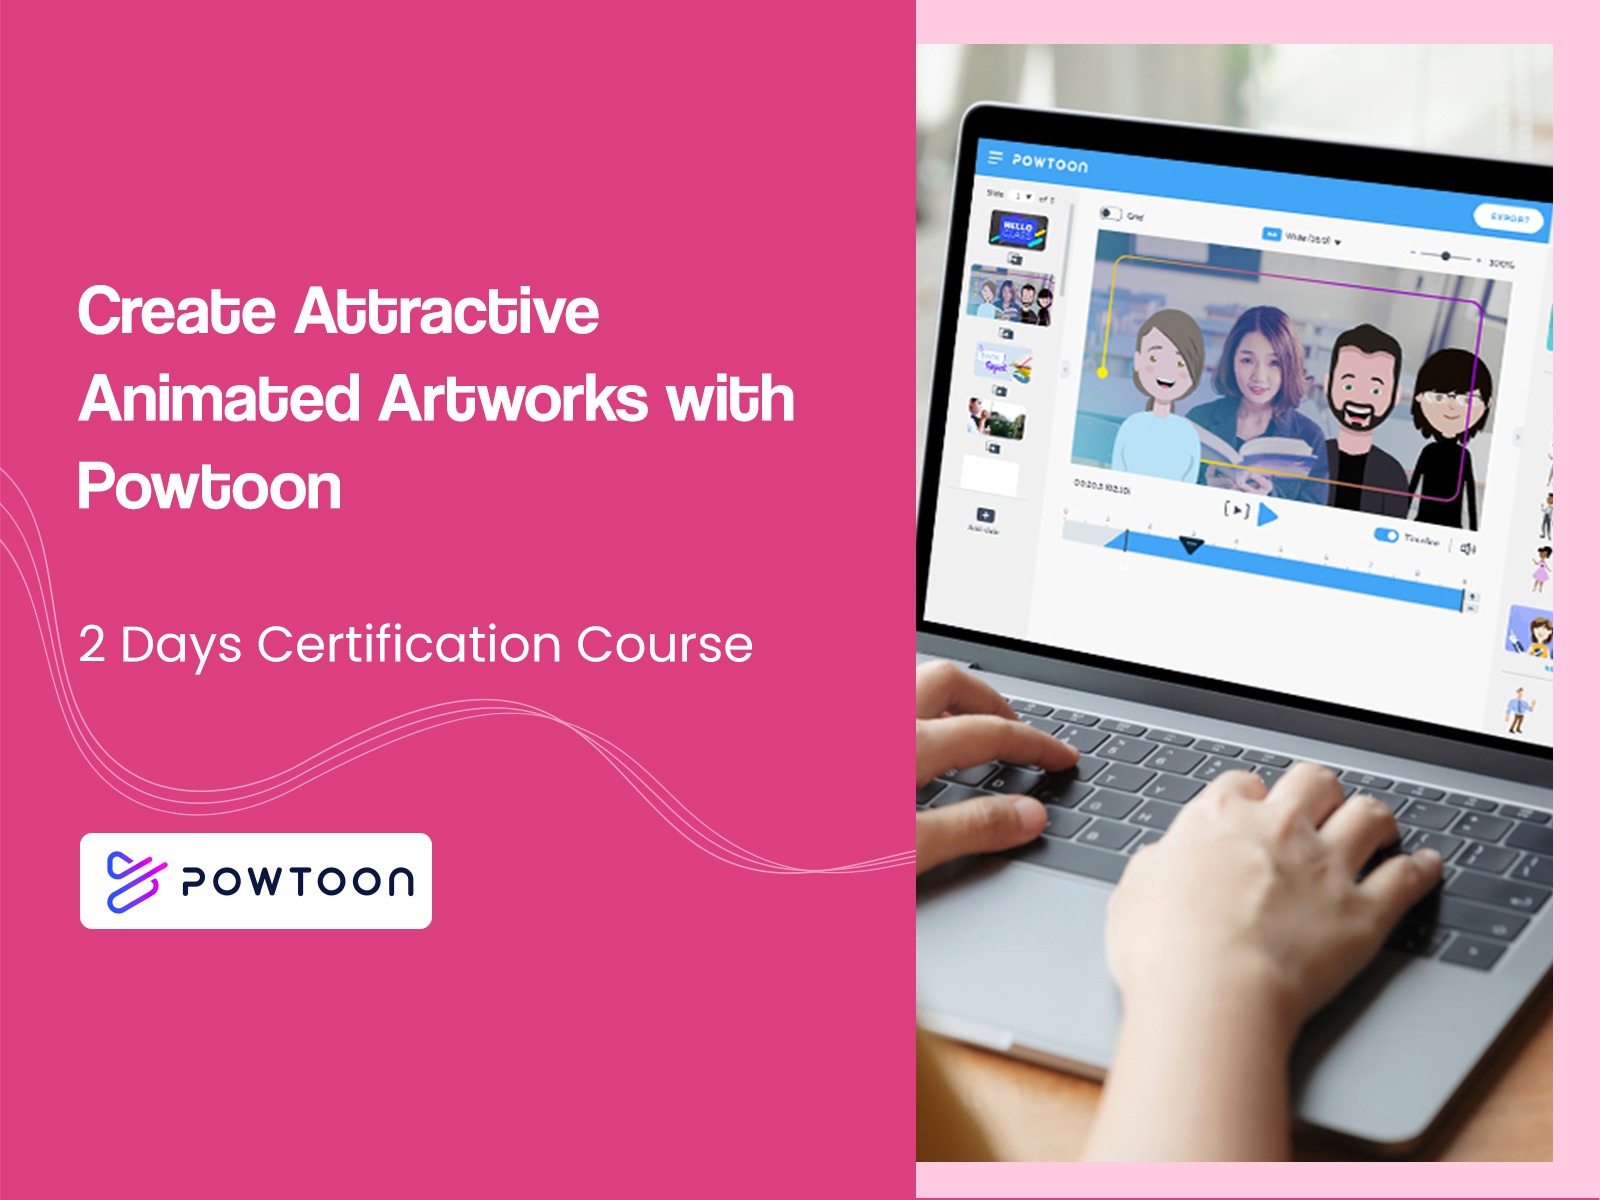 Create Attractive Animated Artworks with Powtoon course in Singapore